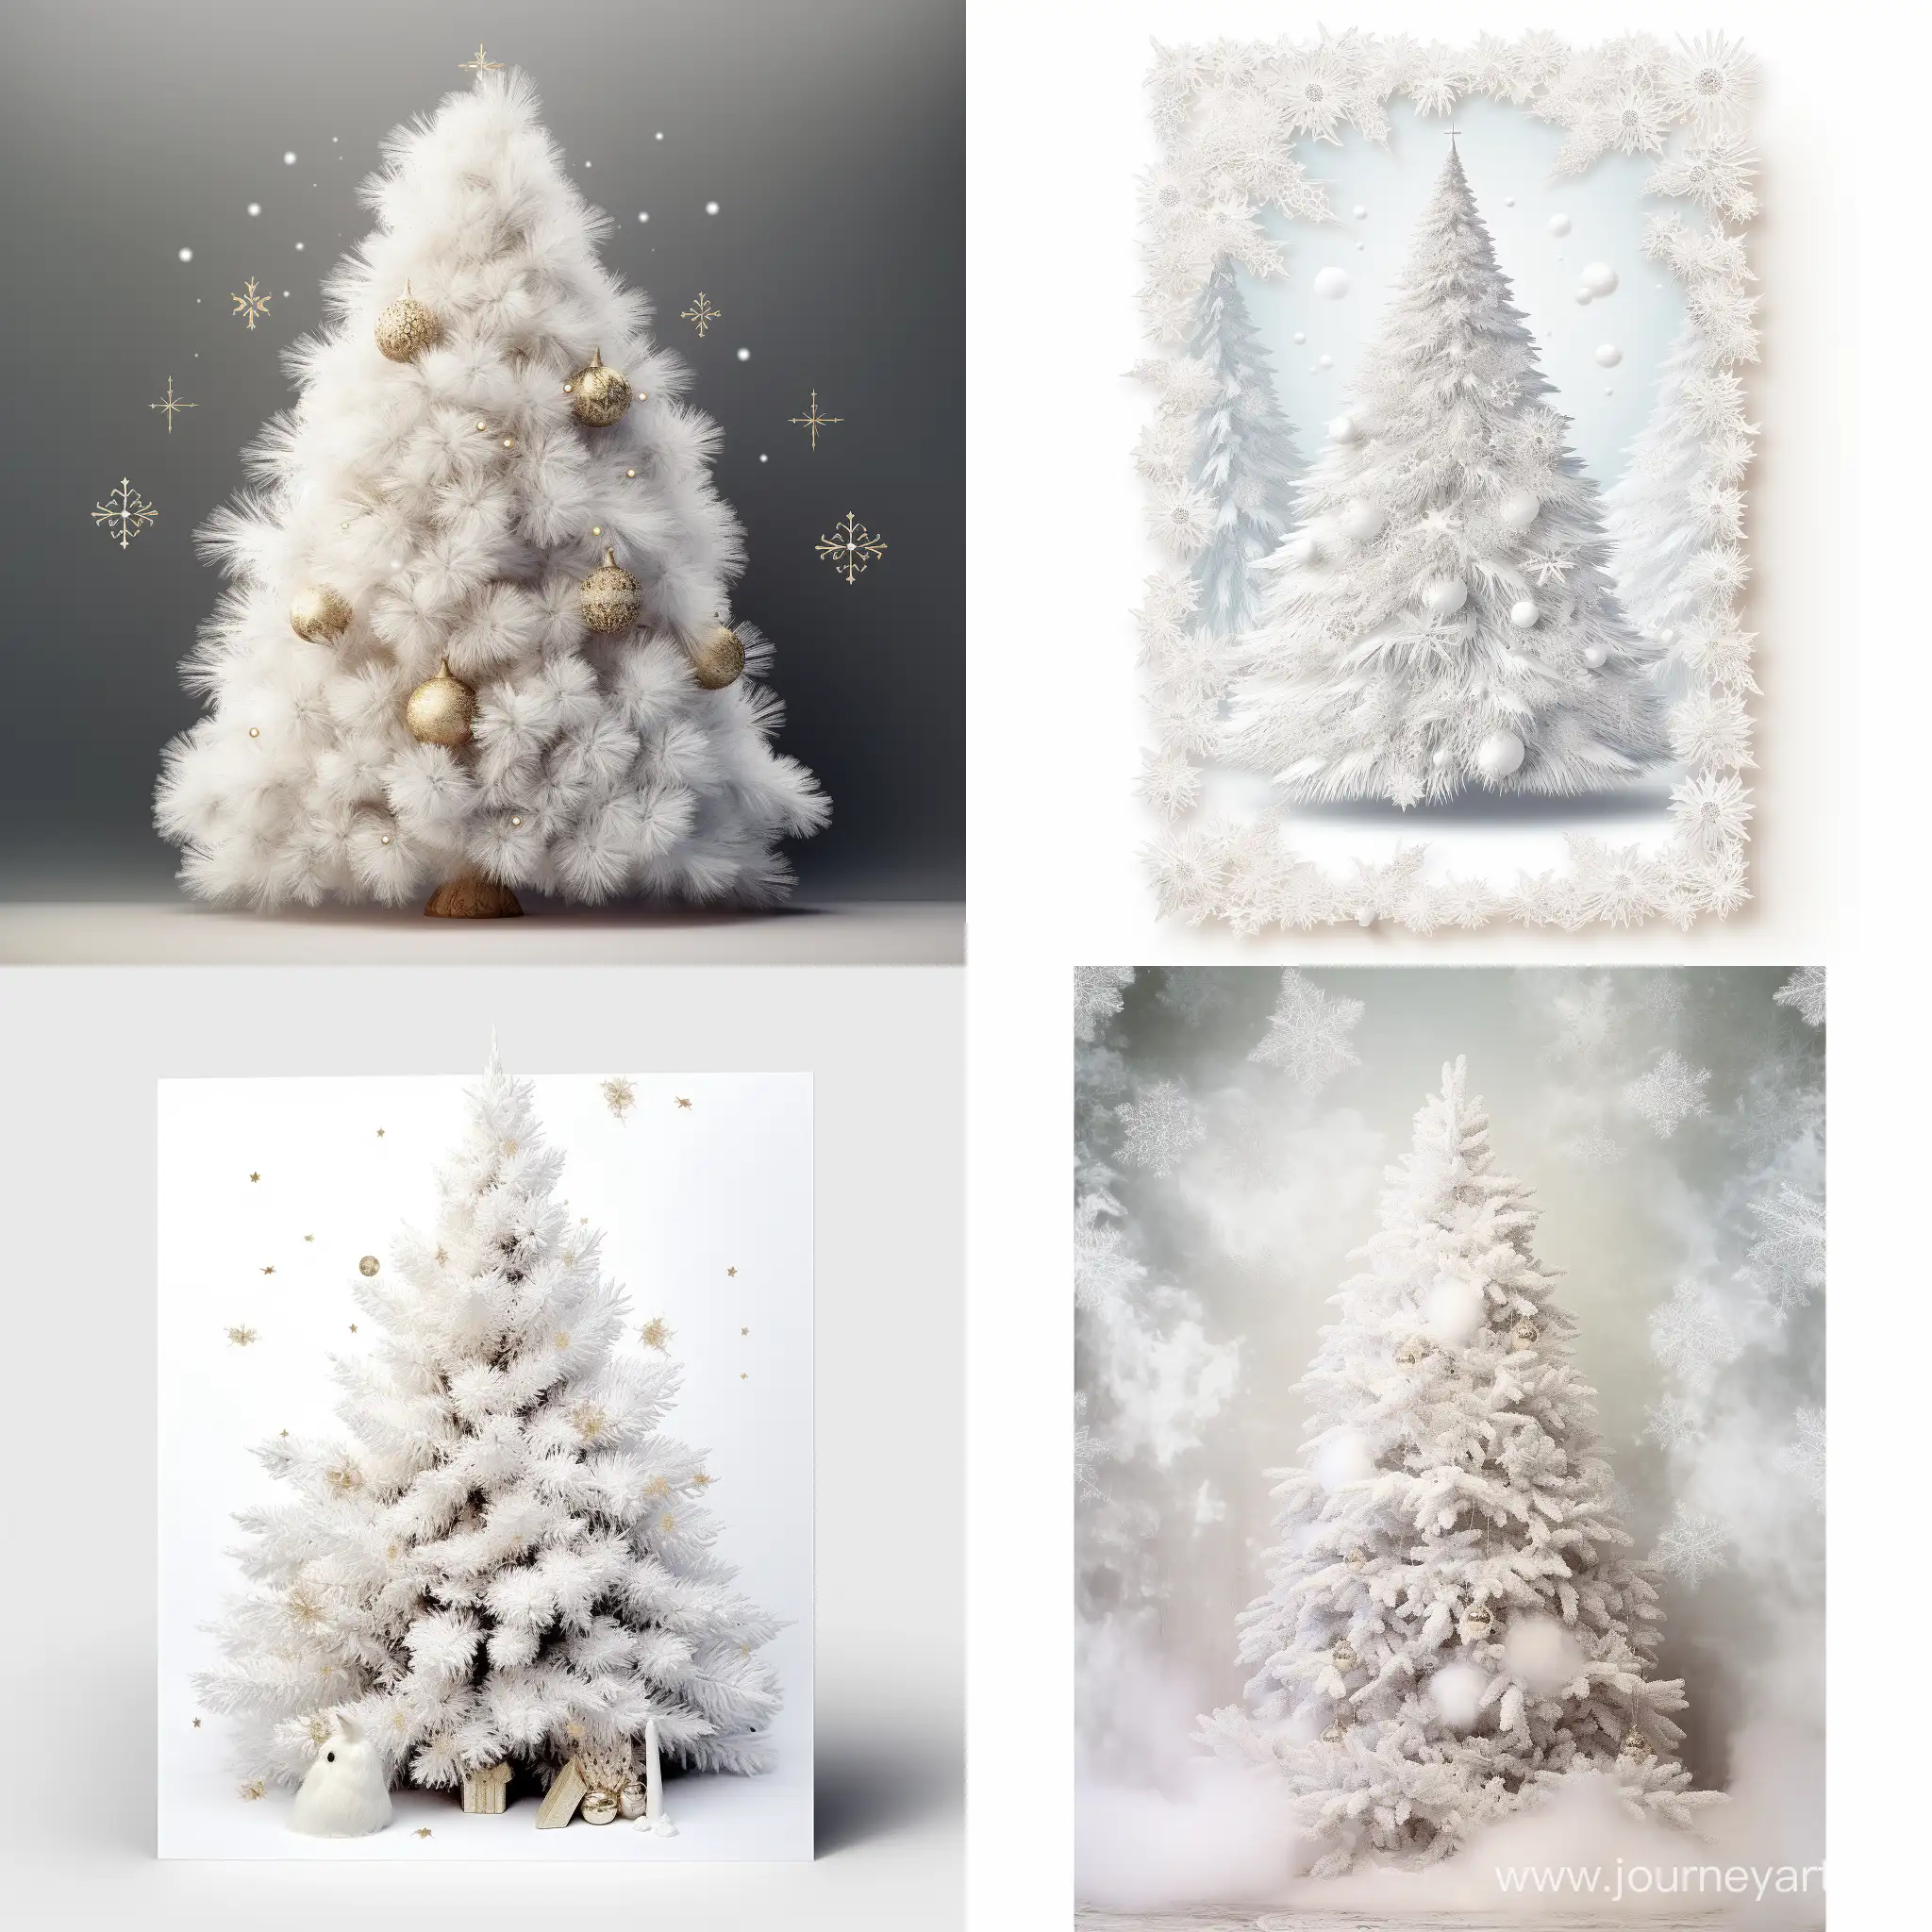 Christmas card with a beautiful white fluffy Christmas tree